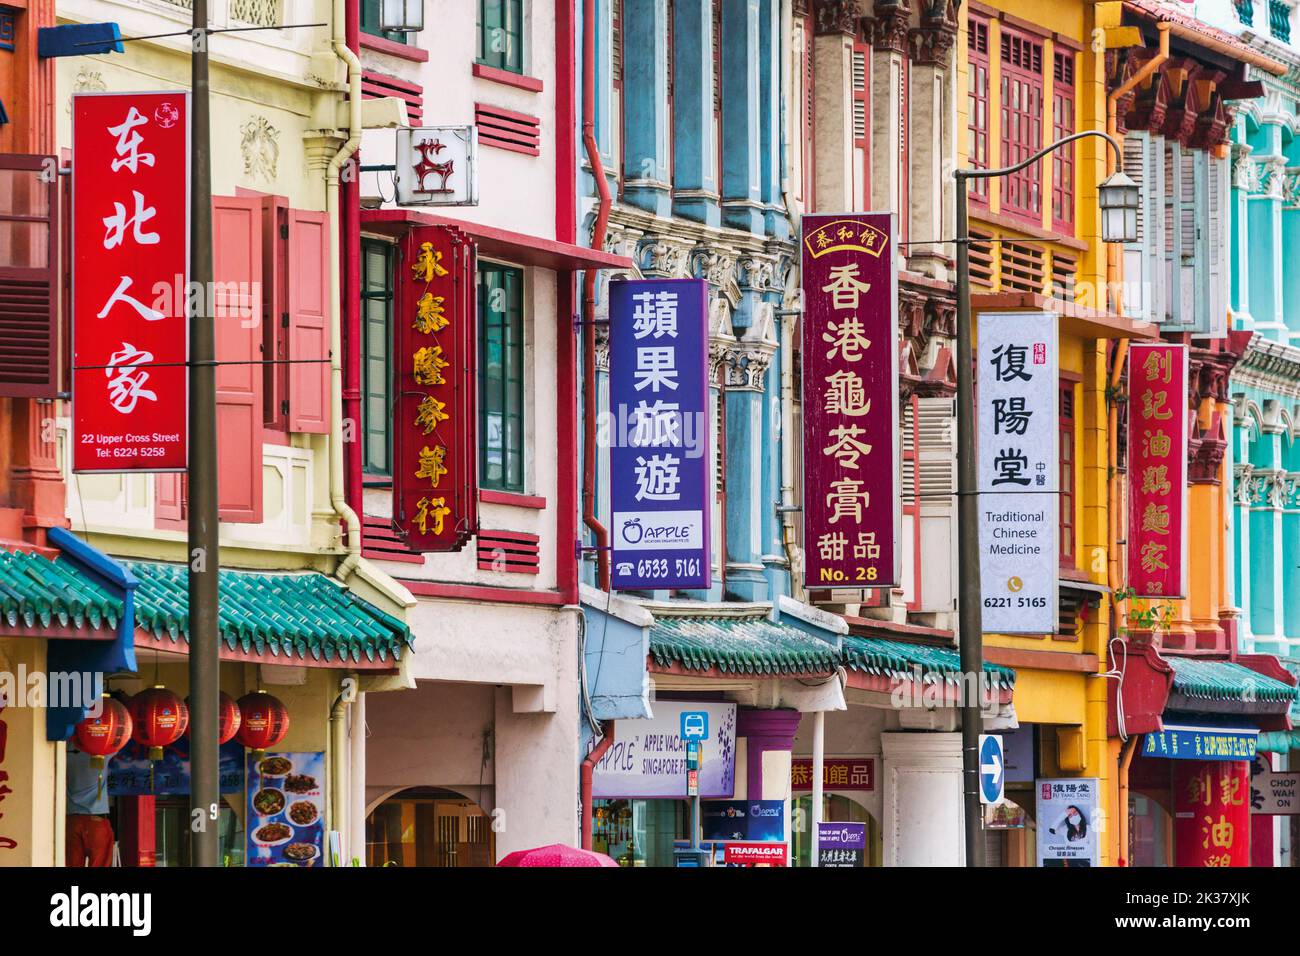 Colourful signs and shop fronts in Upper Cross Street, Chinatown, Singapore. Stock Photo